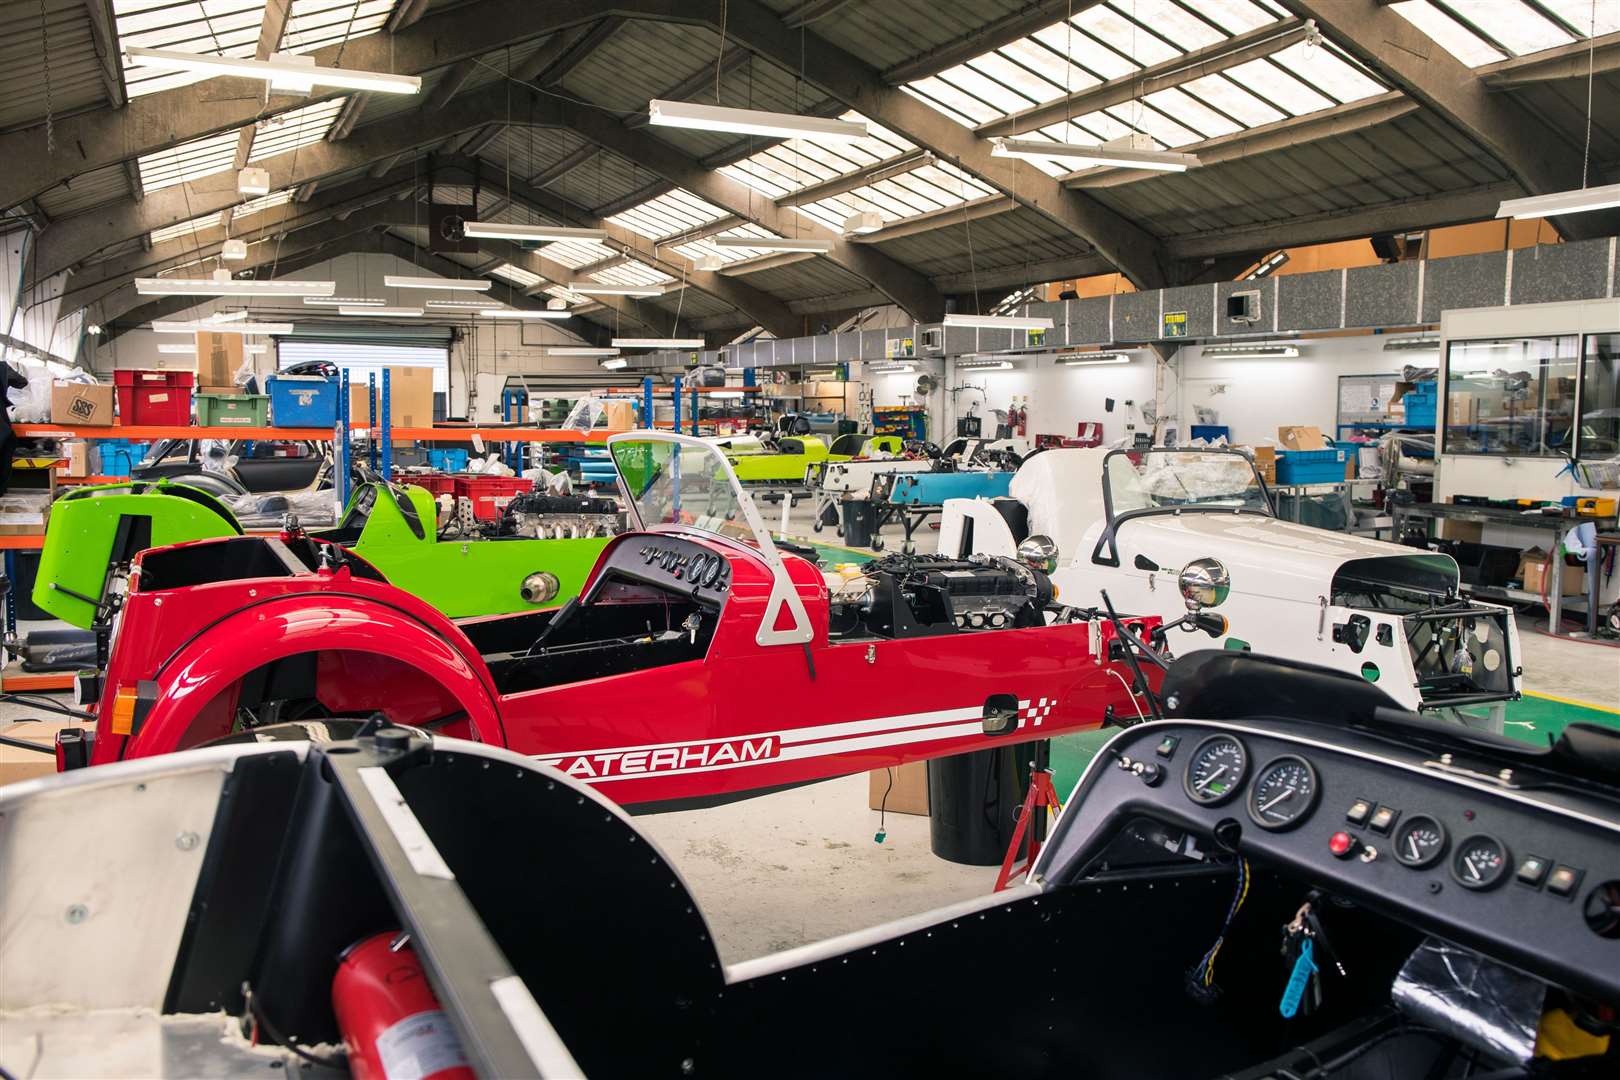 The Caterham factory in Dartford. Picture: PA Photo/Johnny Fleewood